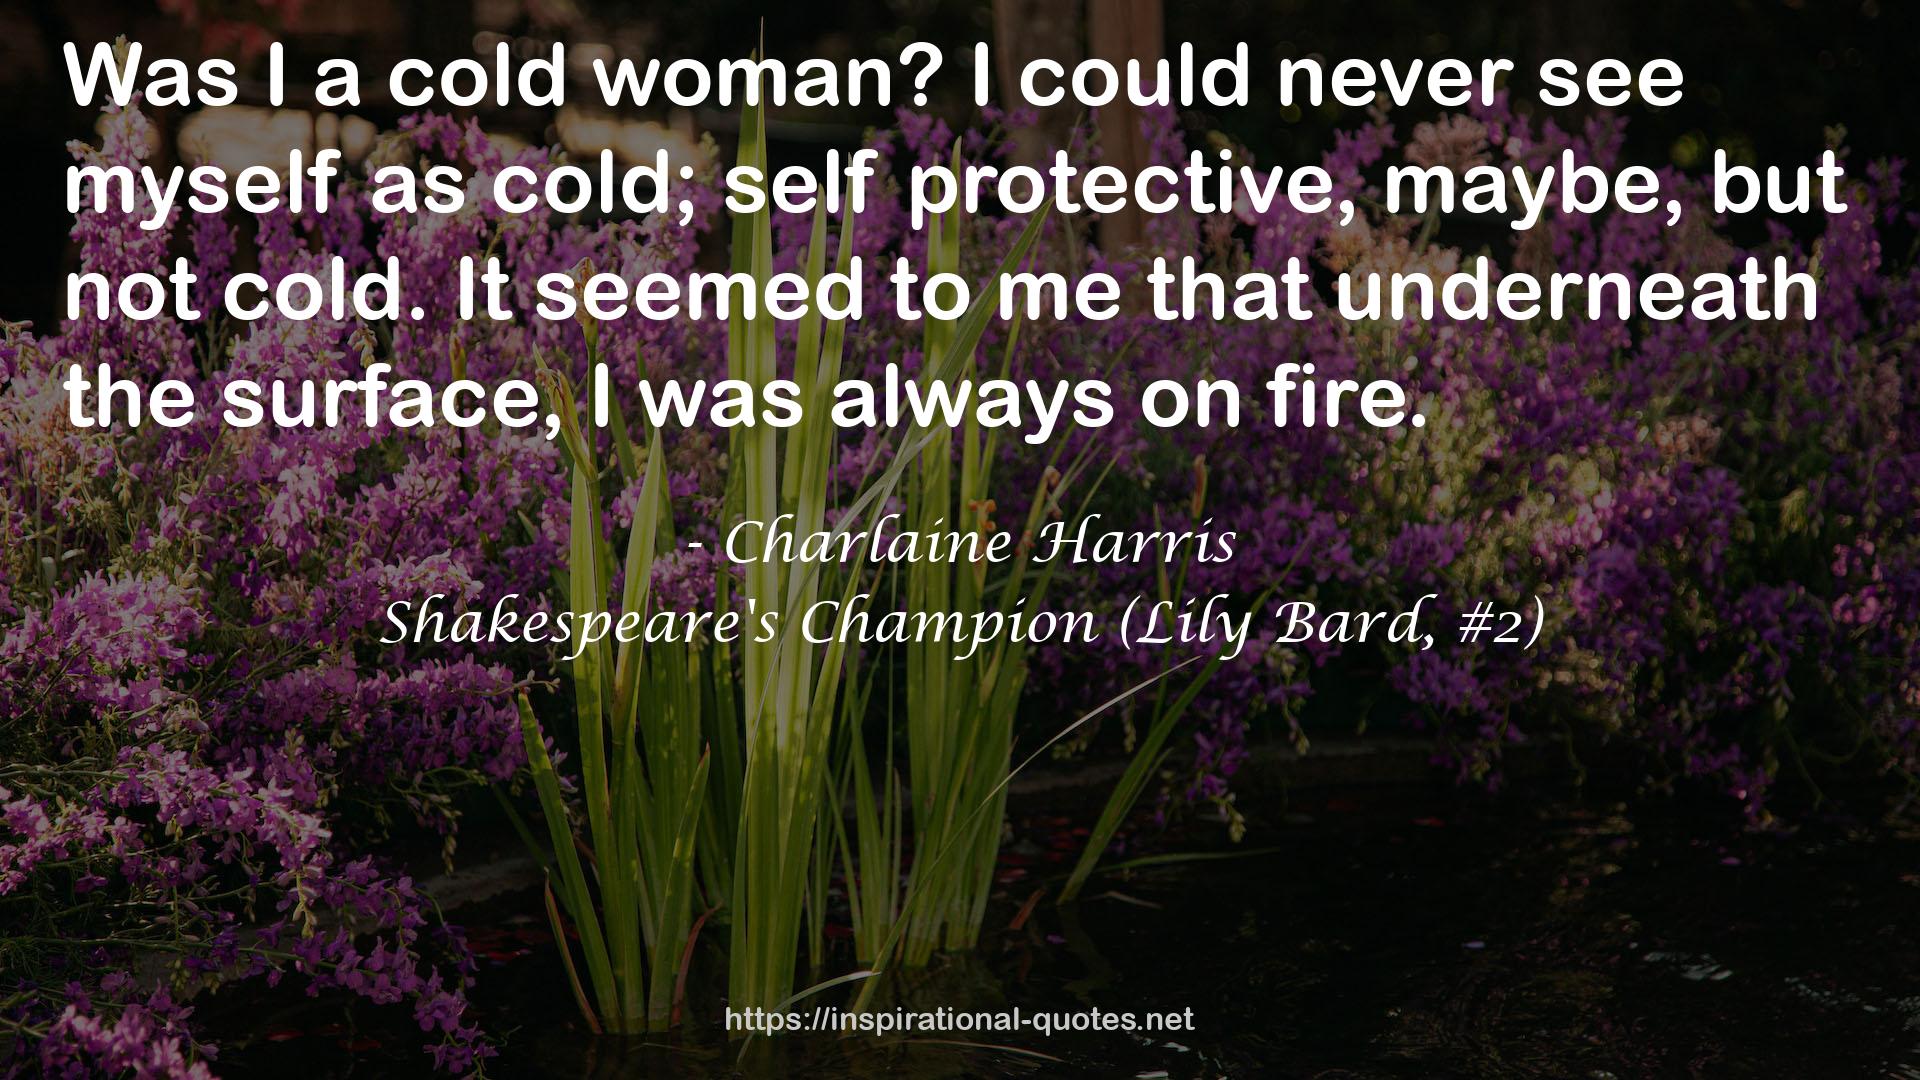 Shakespeare's Champion (Lily Bard, #2) QUOTES